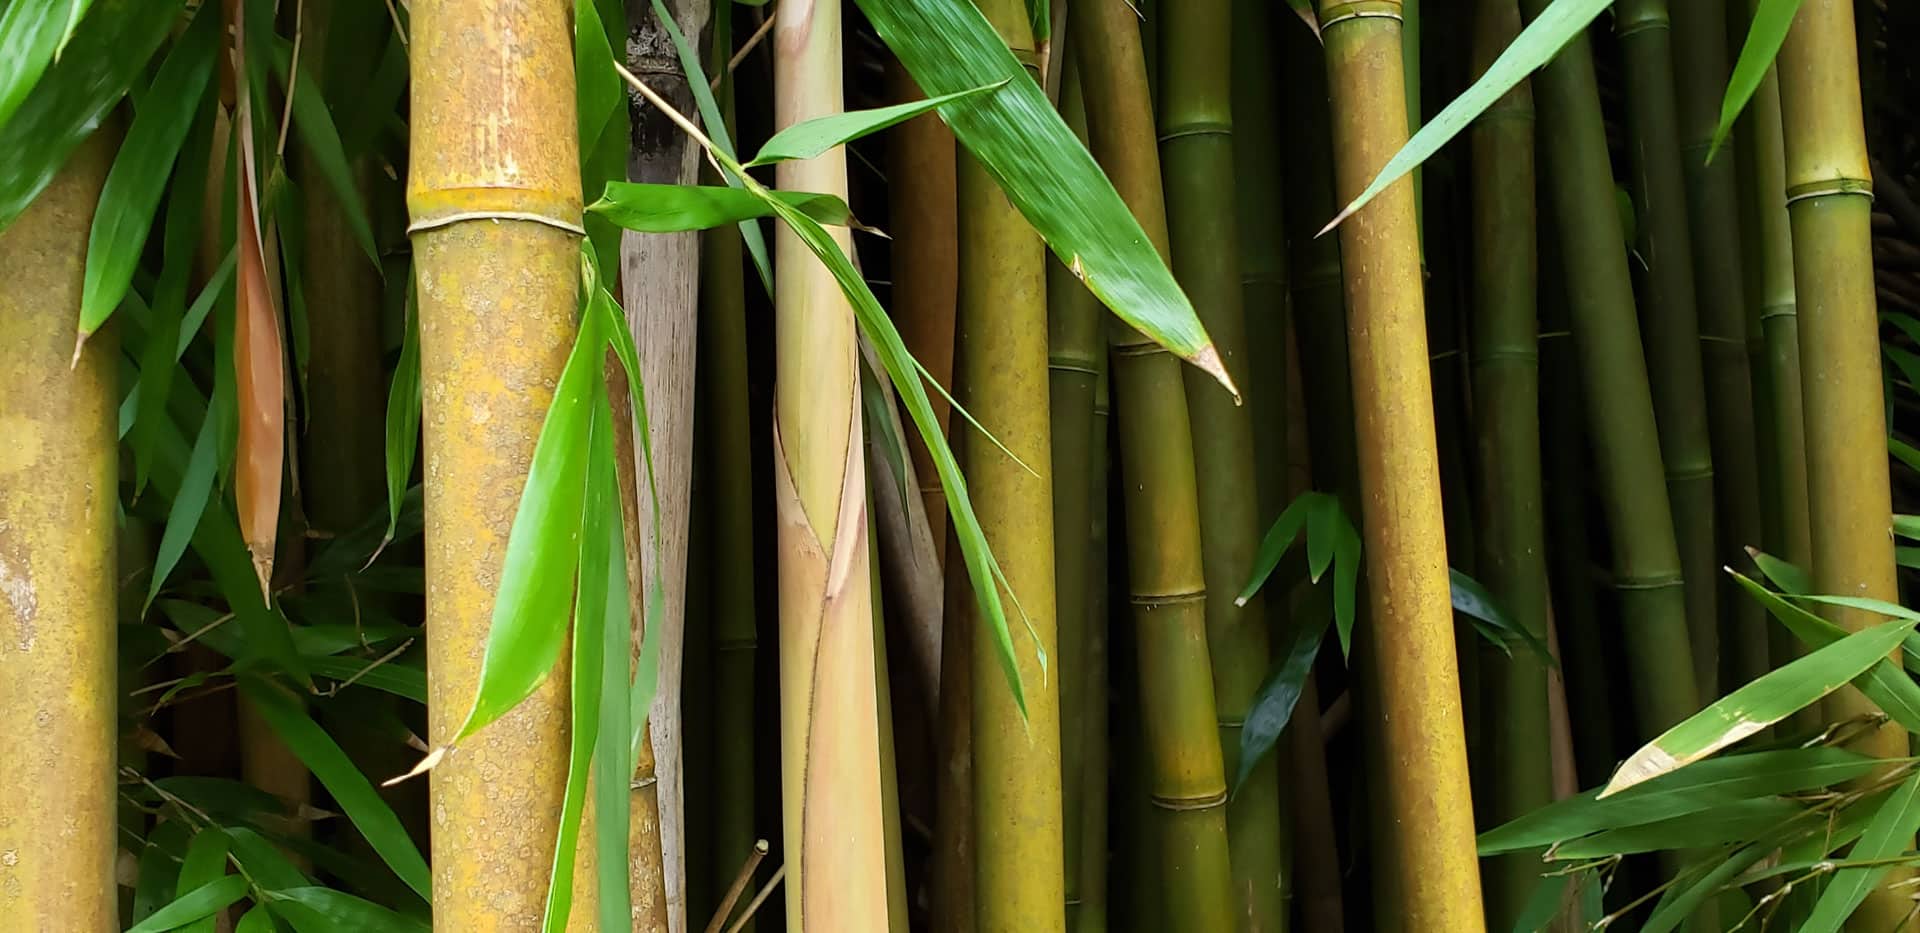 Bamboo is a Sustainable Building Material